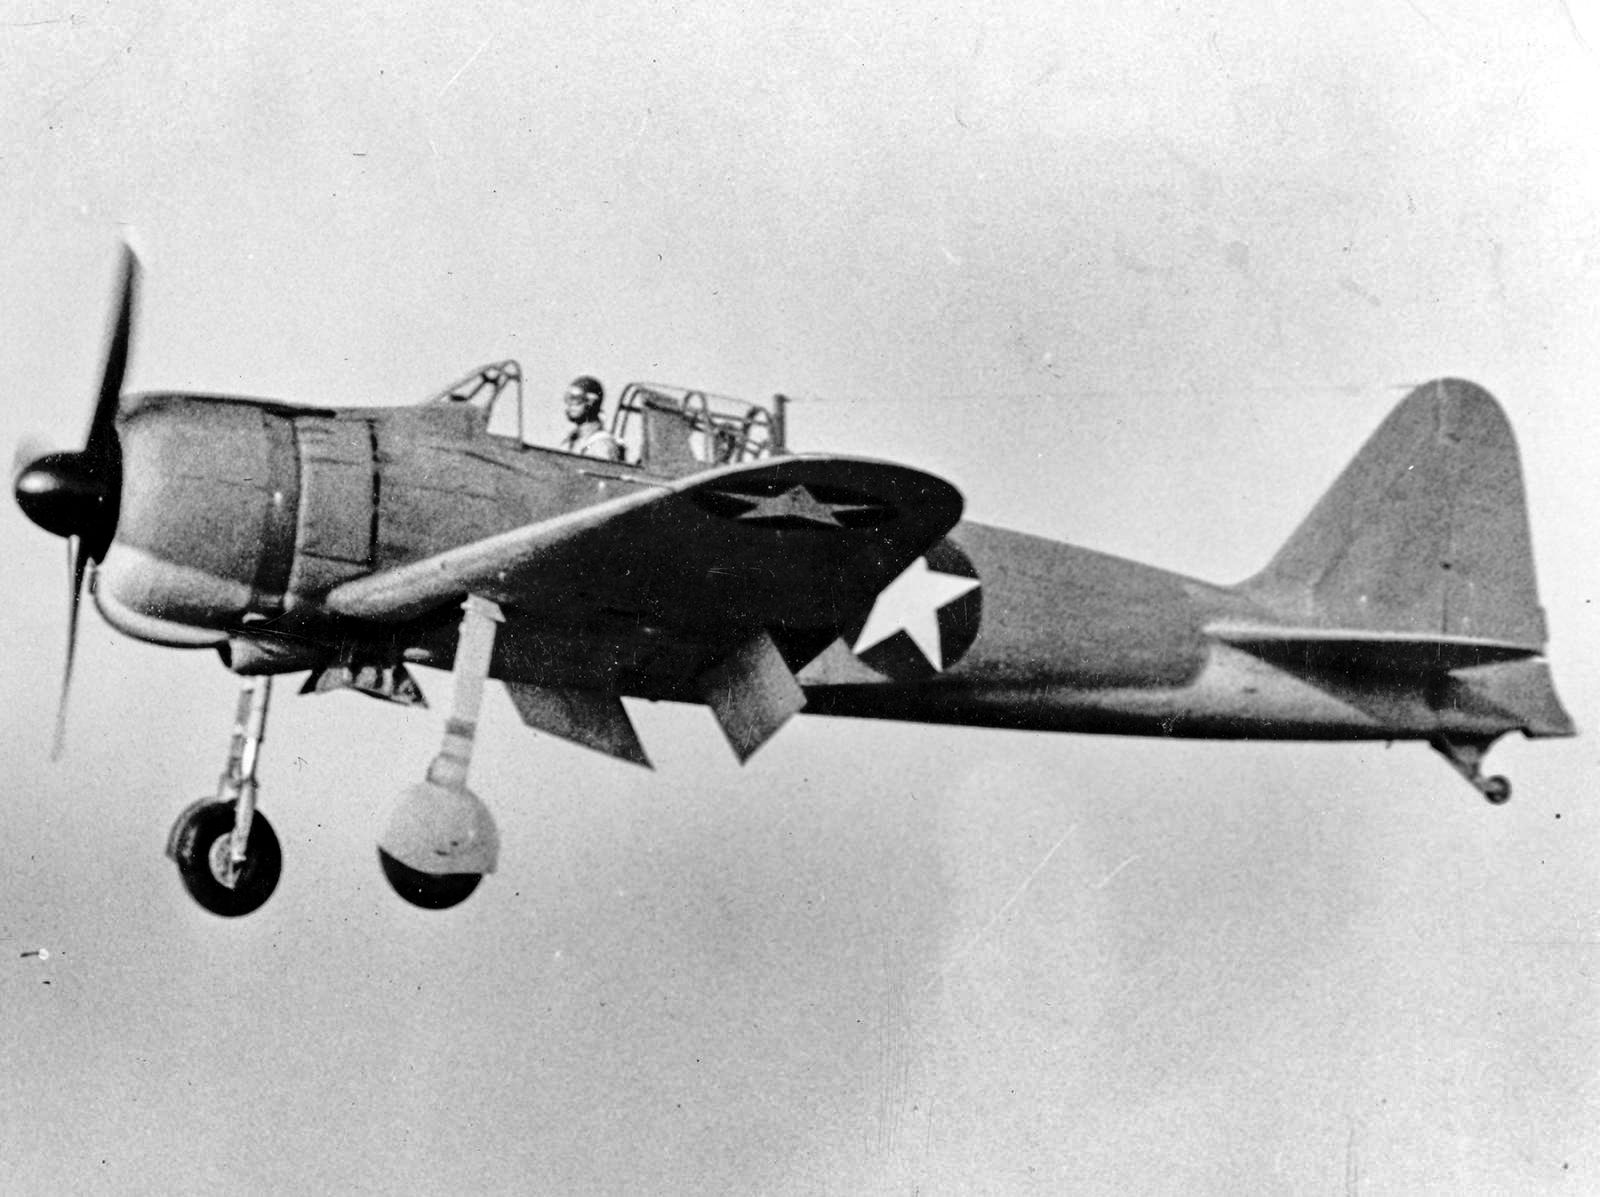 Captured Japanese Zero, discovered crashed in a marsh in the Aleutians Islands, flown by Trapnell’s team (with U.S. markings) to learn the aircraft’s strengths and weaknesses.